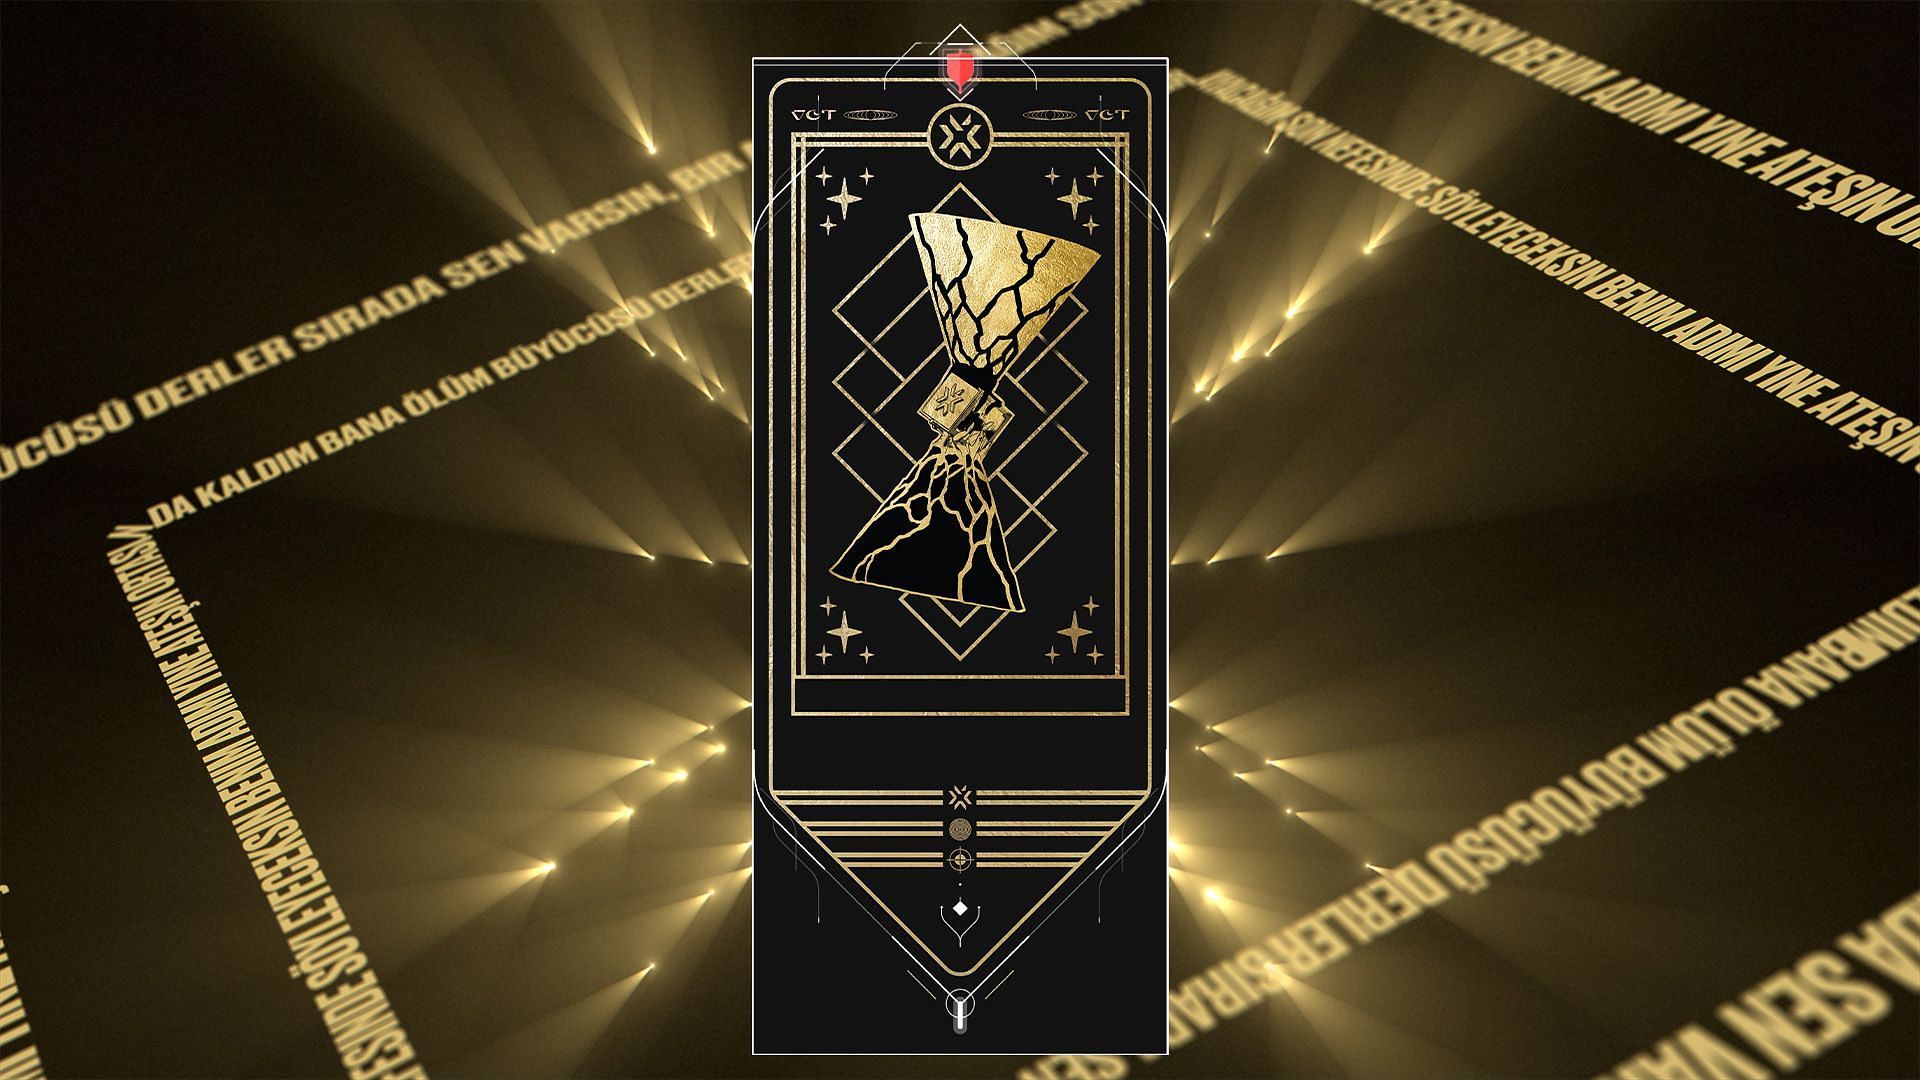 The Champions 2022 collection in Valorant will also include a Player Card (Image via Riot Games)